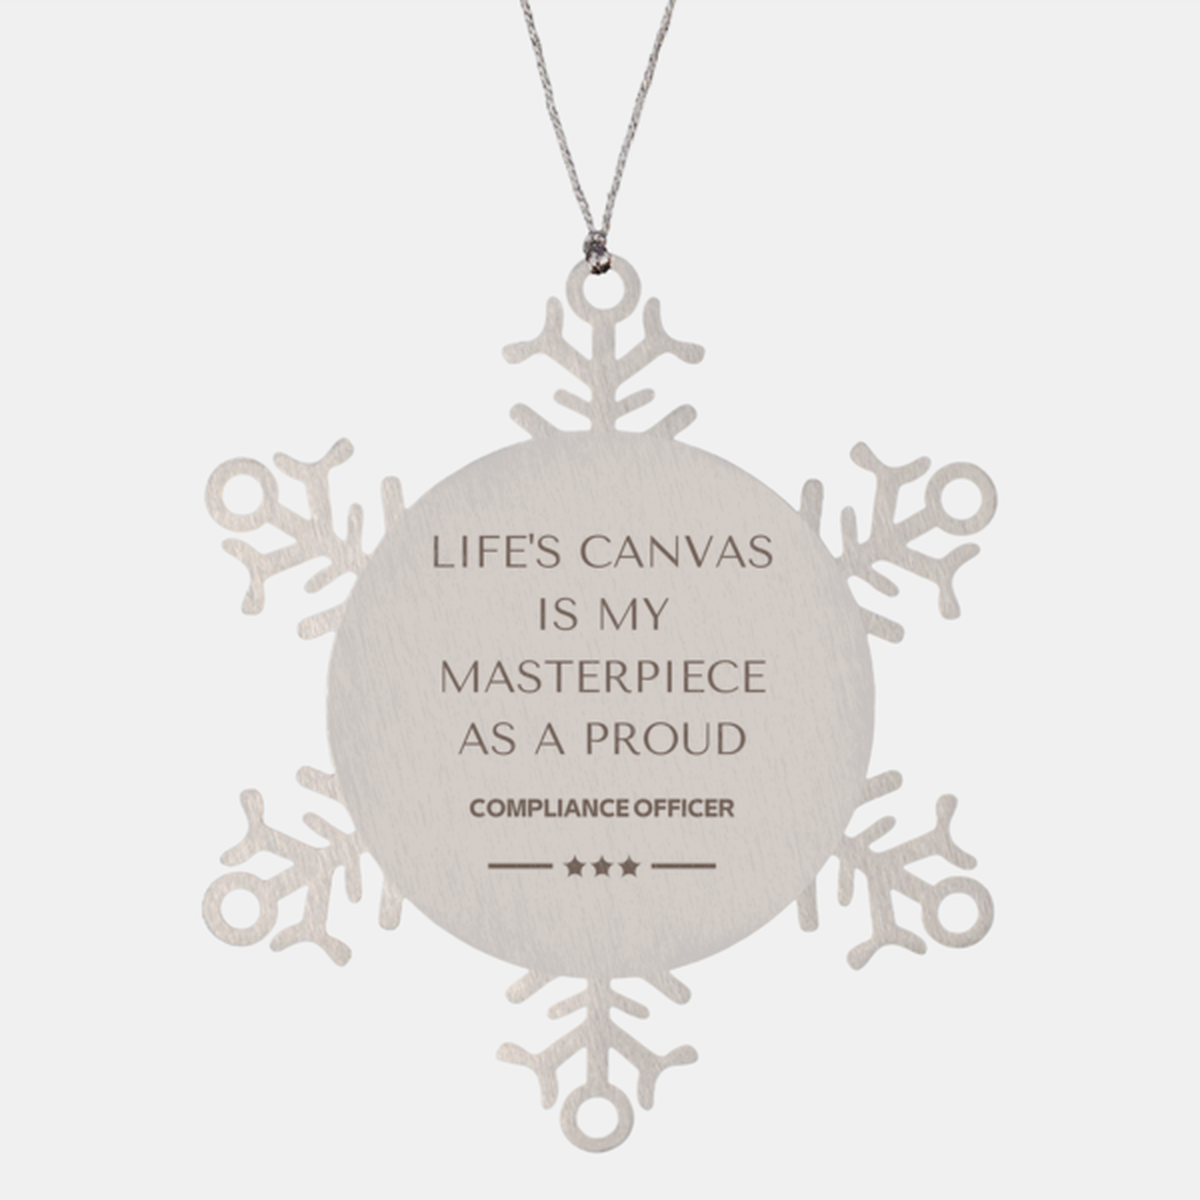 Proud Compliance Officer Gifts, Life's canvas is my masterpiece, Epic Birthday Christmas Unique Snowflake Ornament For Compliance Officer, Coworkers, Men, Women, Friends